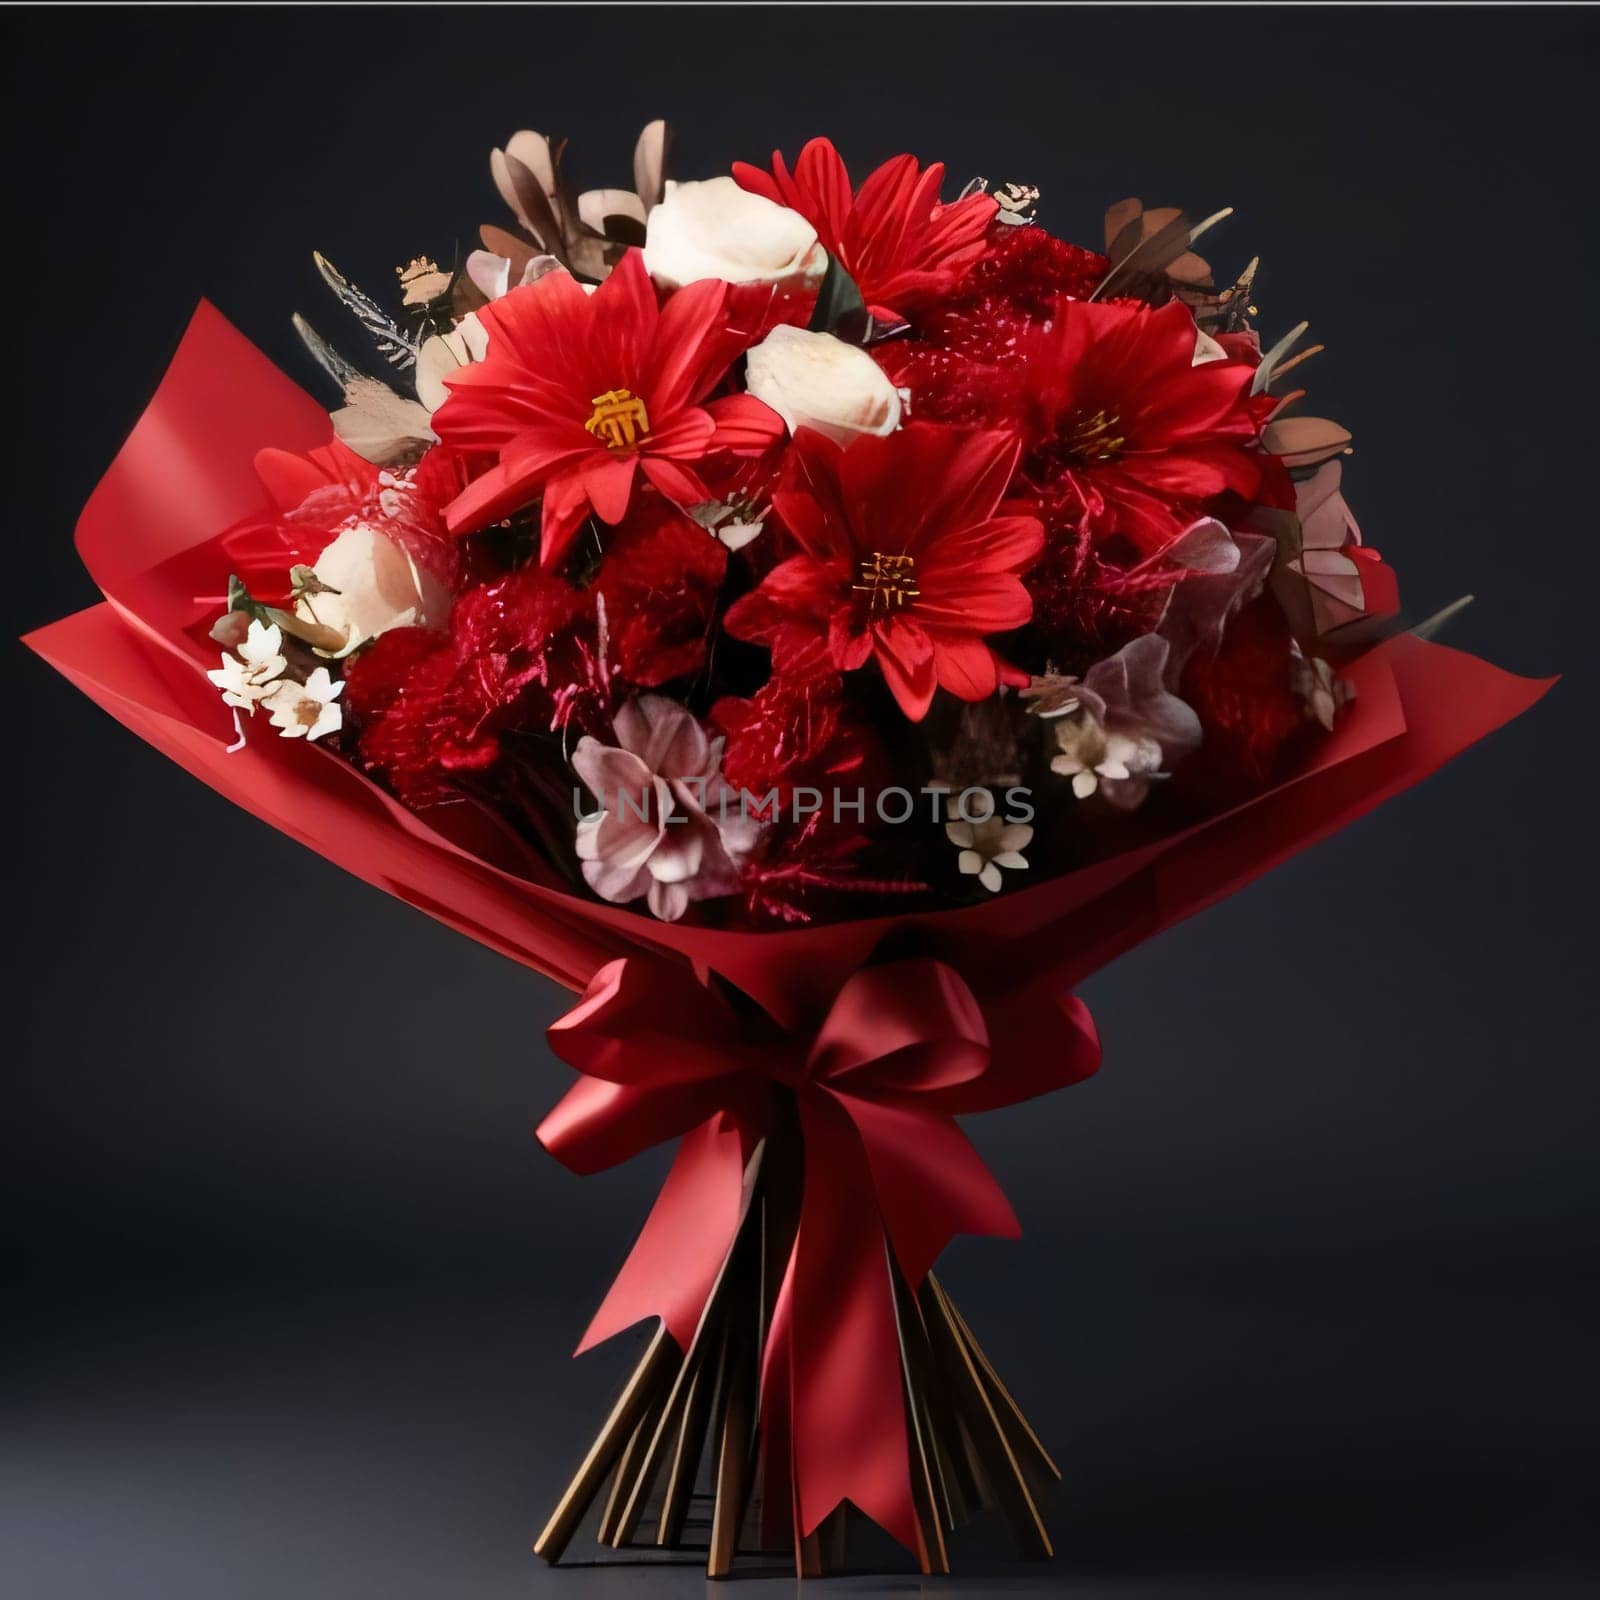 Red bouquet of flowers decorated with a red bow on a dark background. Flowering flowers, a symbol of spring, new life. A joyful time of nature waking up to life.